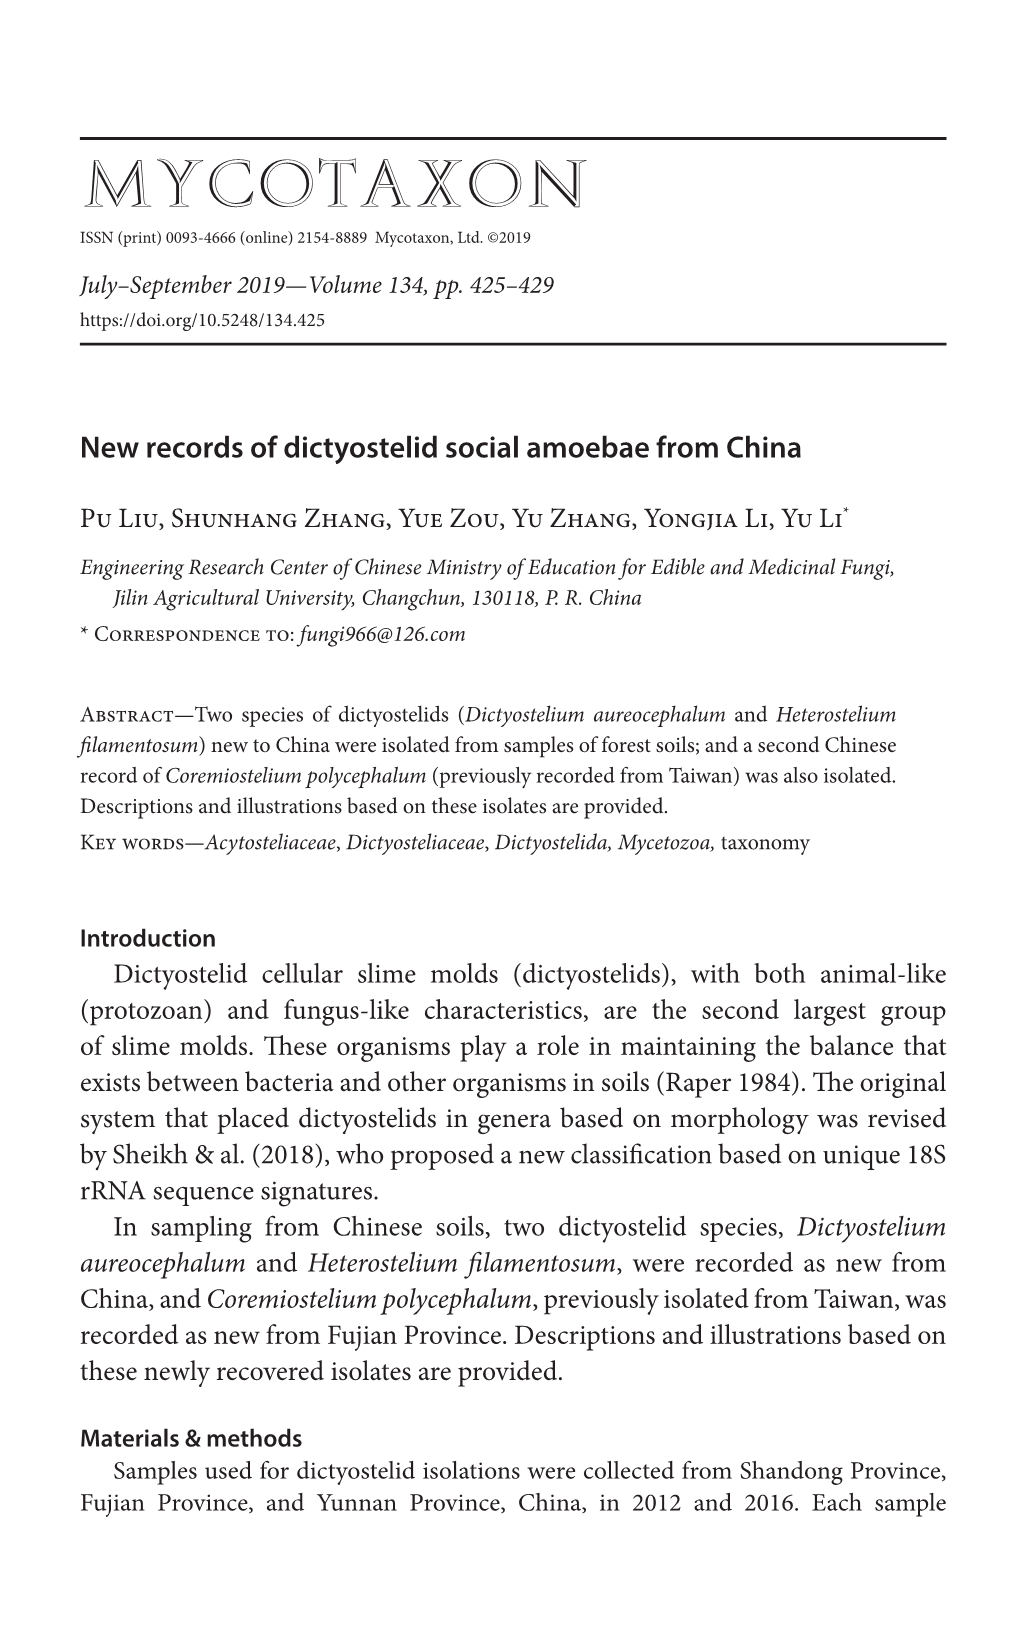 New Records of Dictyostelid Social Amoebae from China